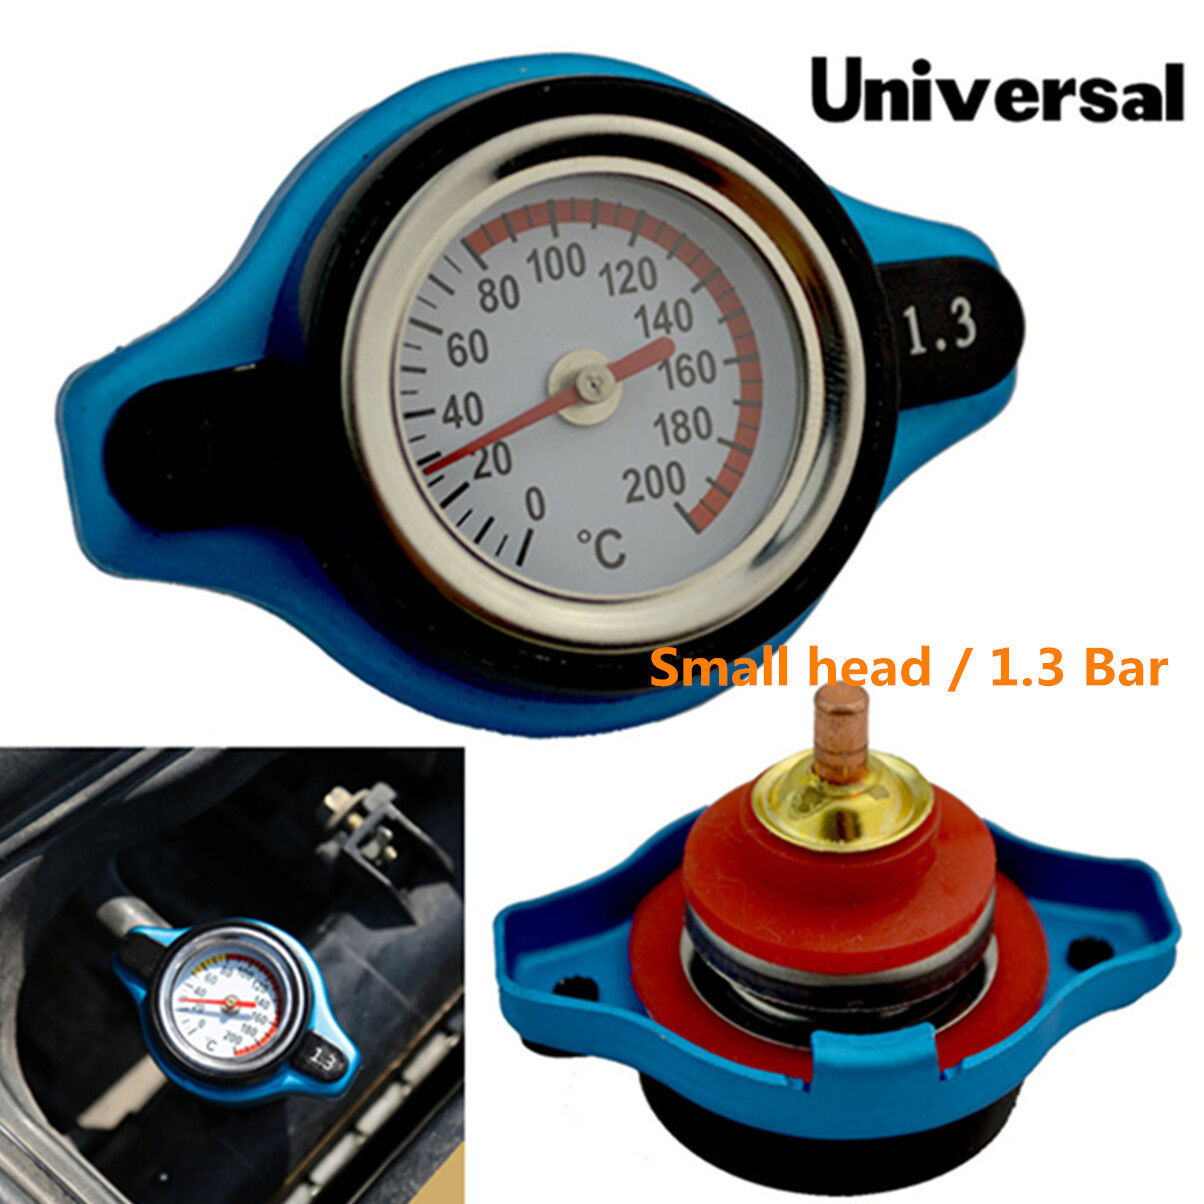 Universal 1.3 Bar Thermo Thermostatic Radiator Cap Cover Water Temperature Gauge